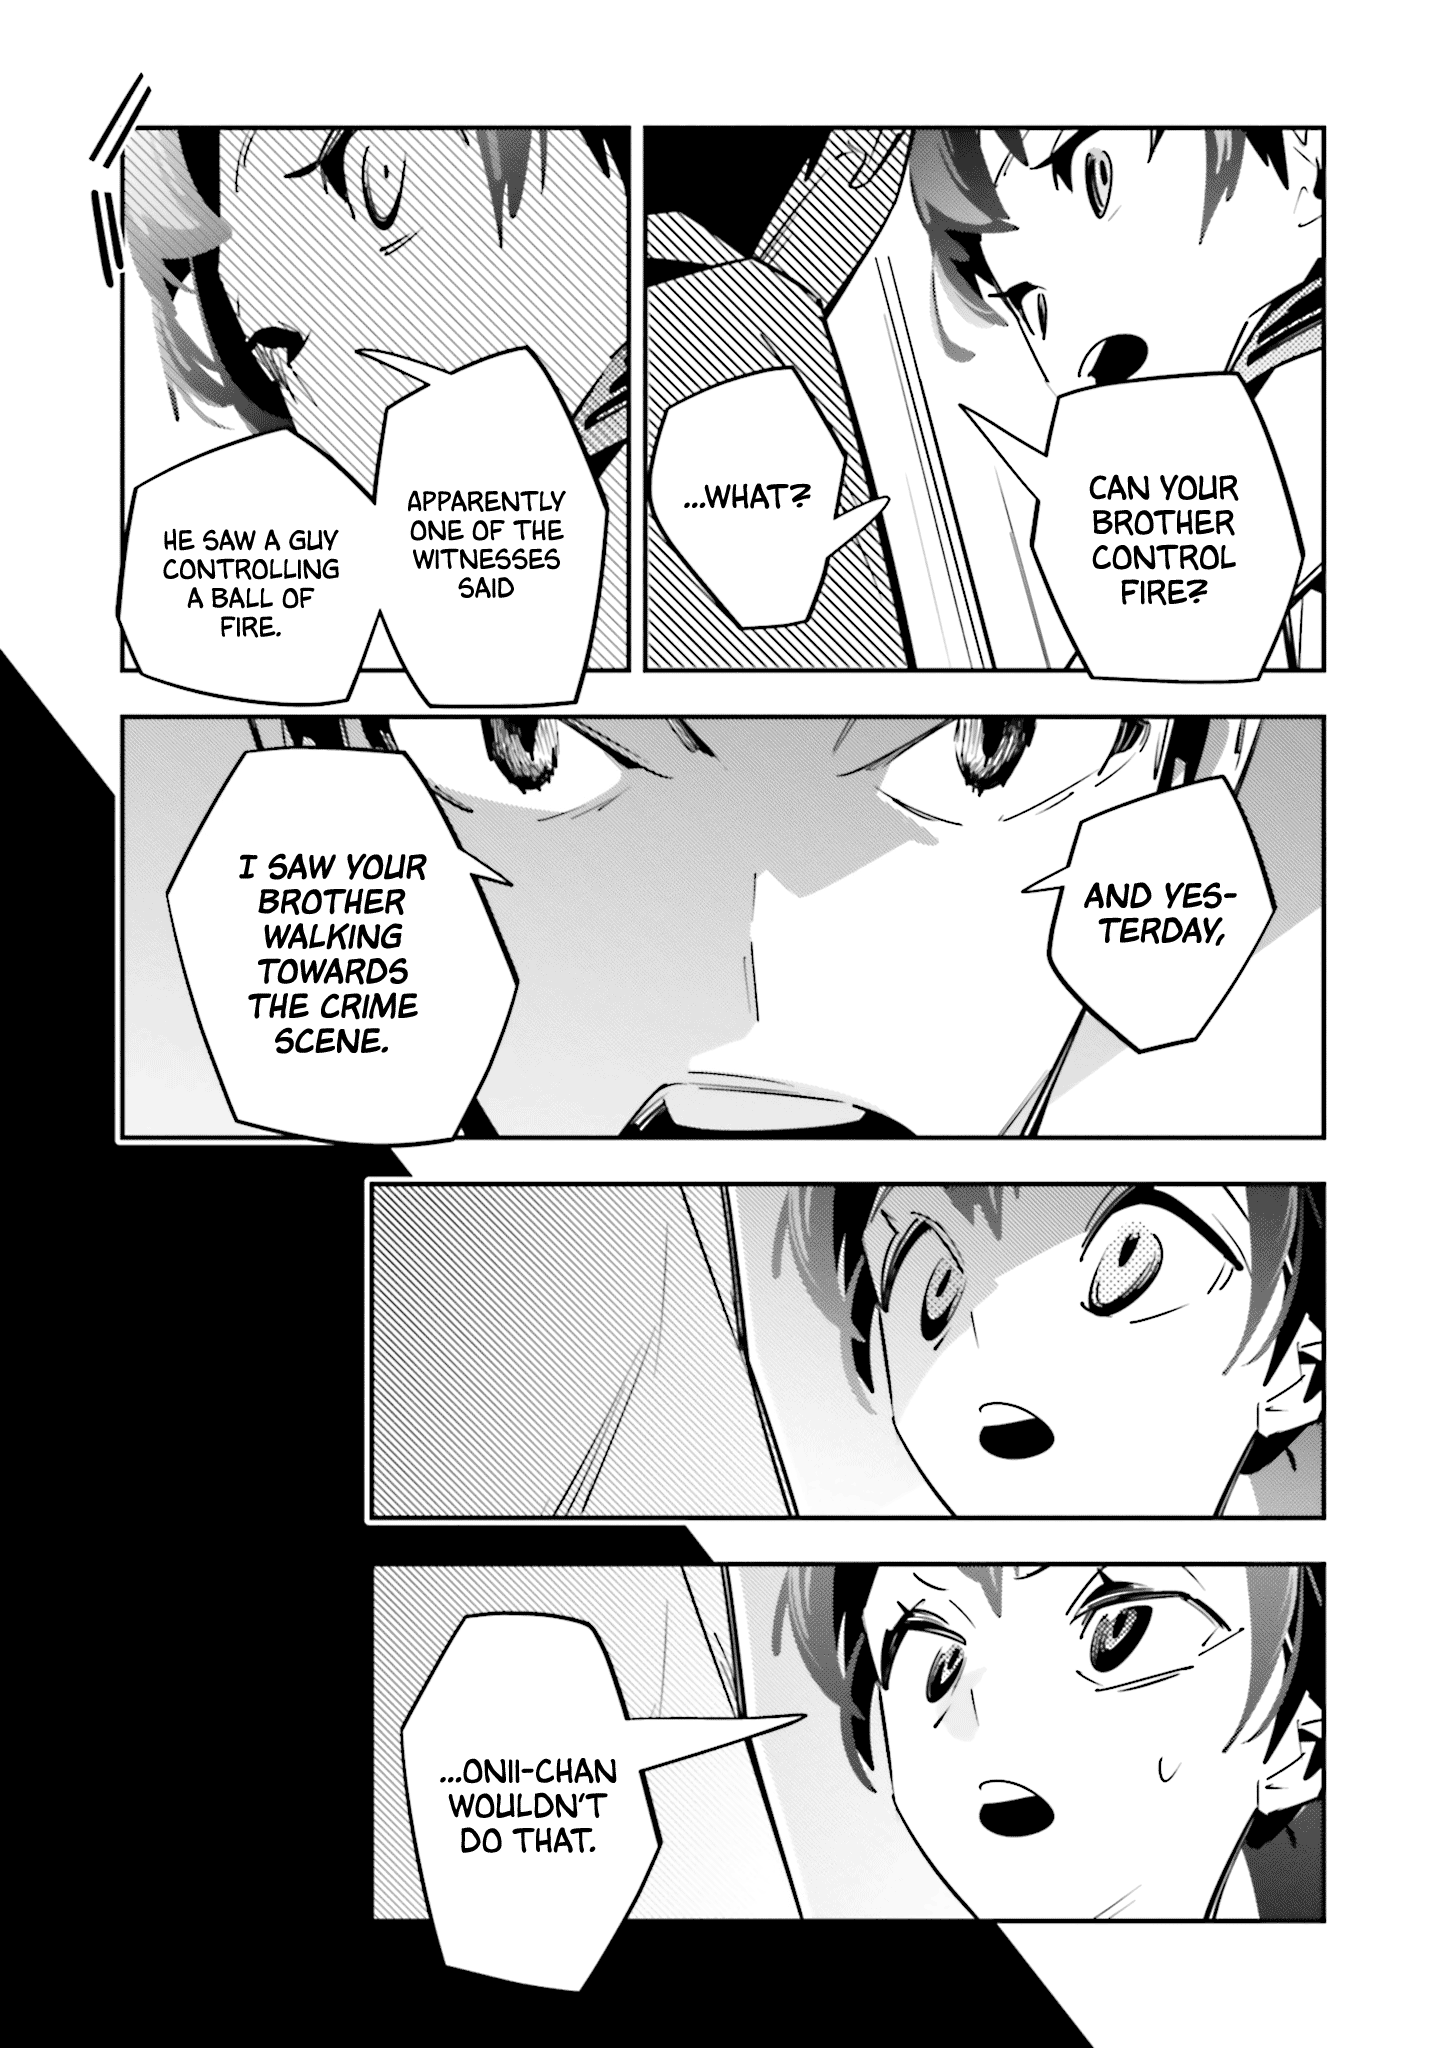 I Reincarnated As The Little Sister Of A Death Game Manga's Murder Mastermind And Failed Chapter 2 #18